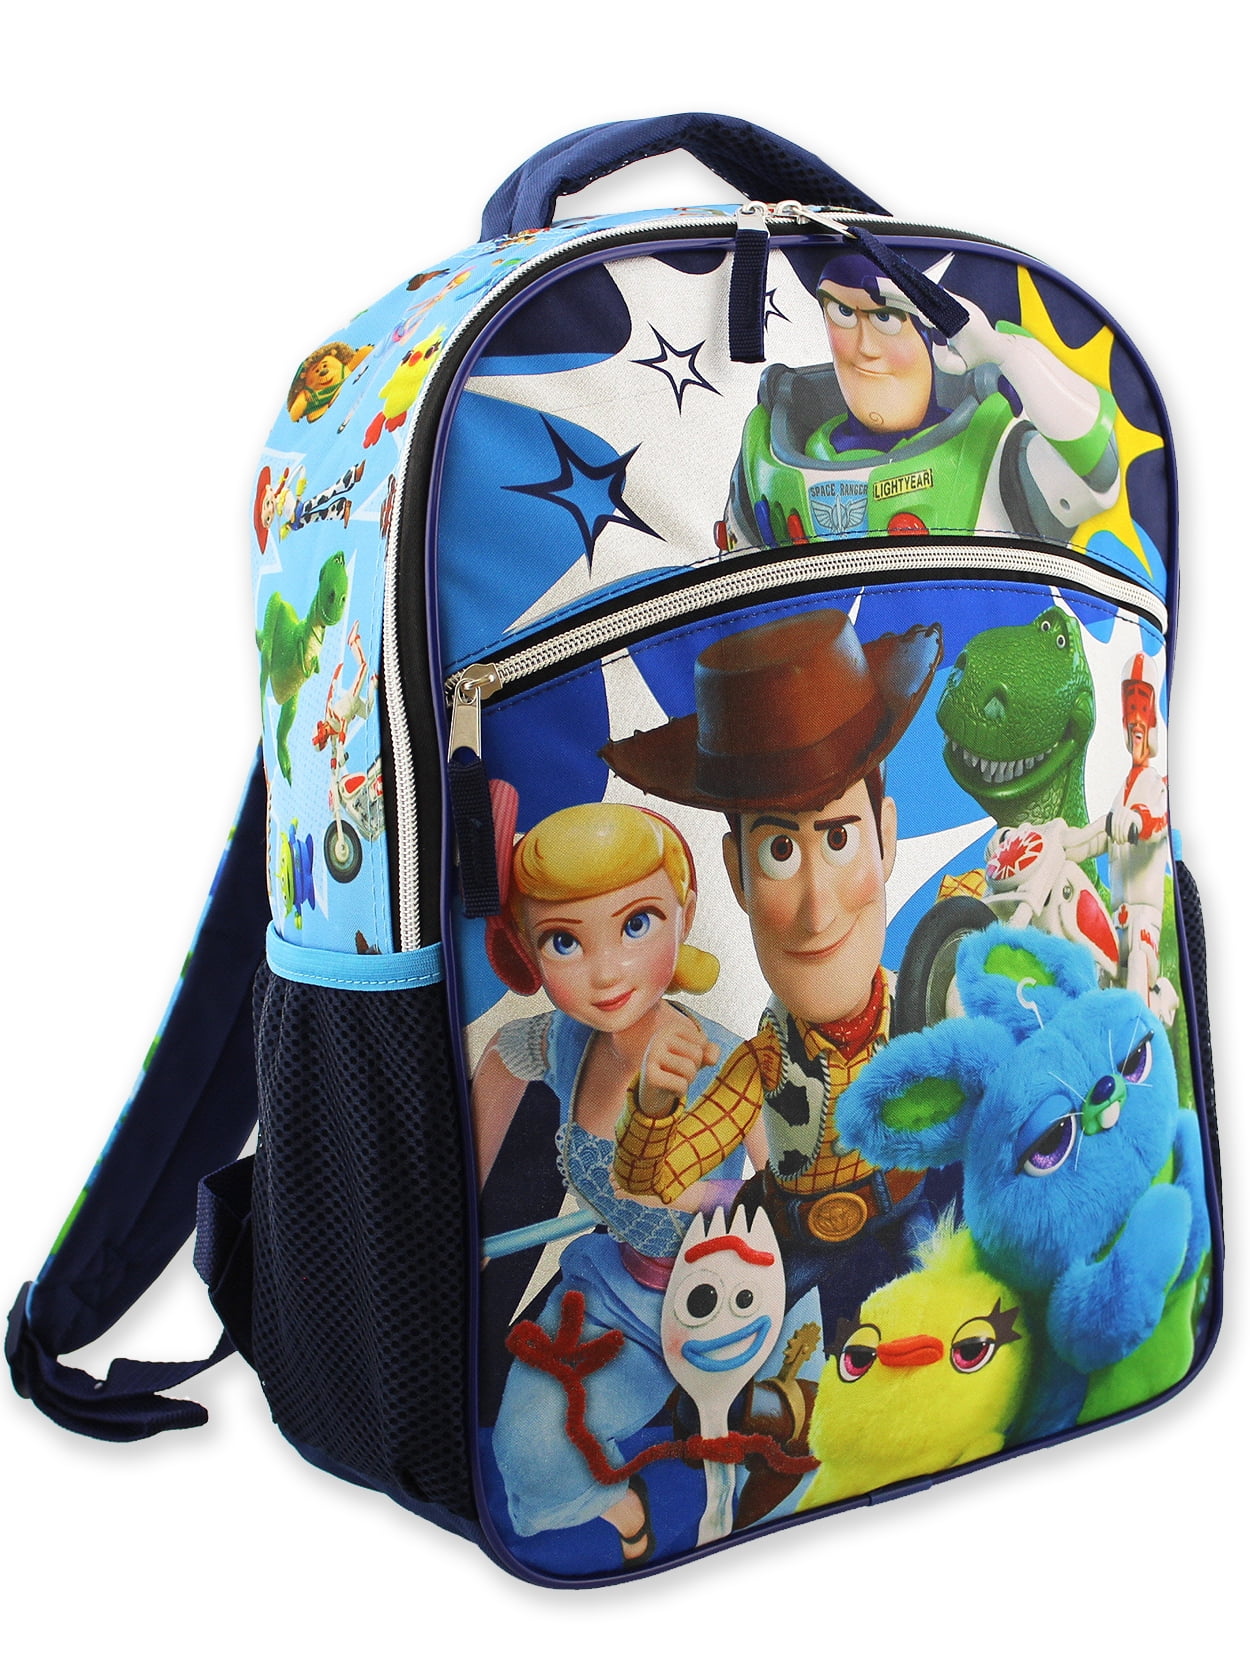 Lunch Bag and Crayola Set Toy Story 4 16" Kids Backpack 